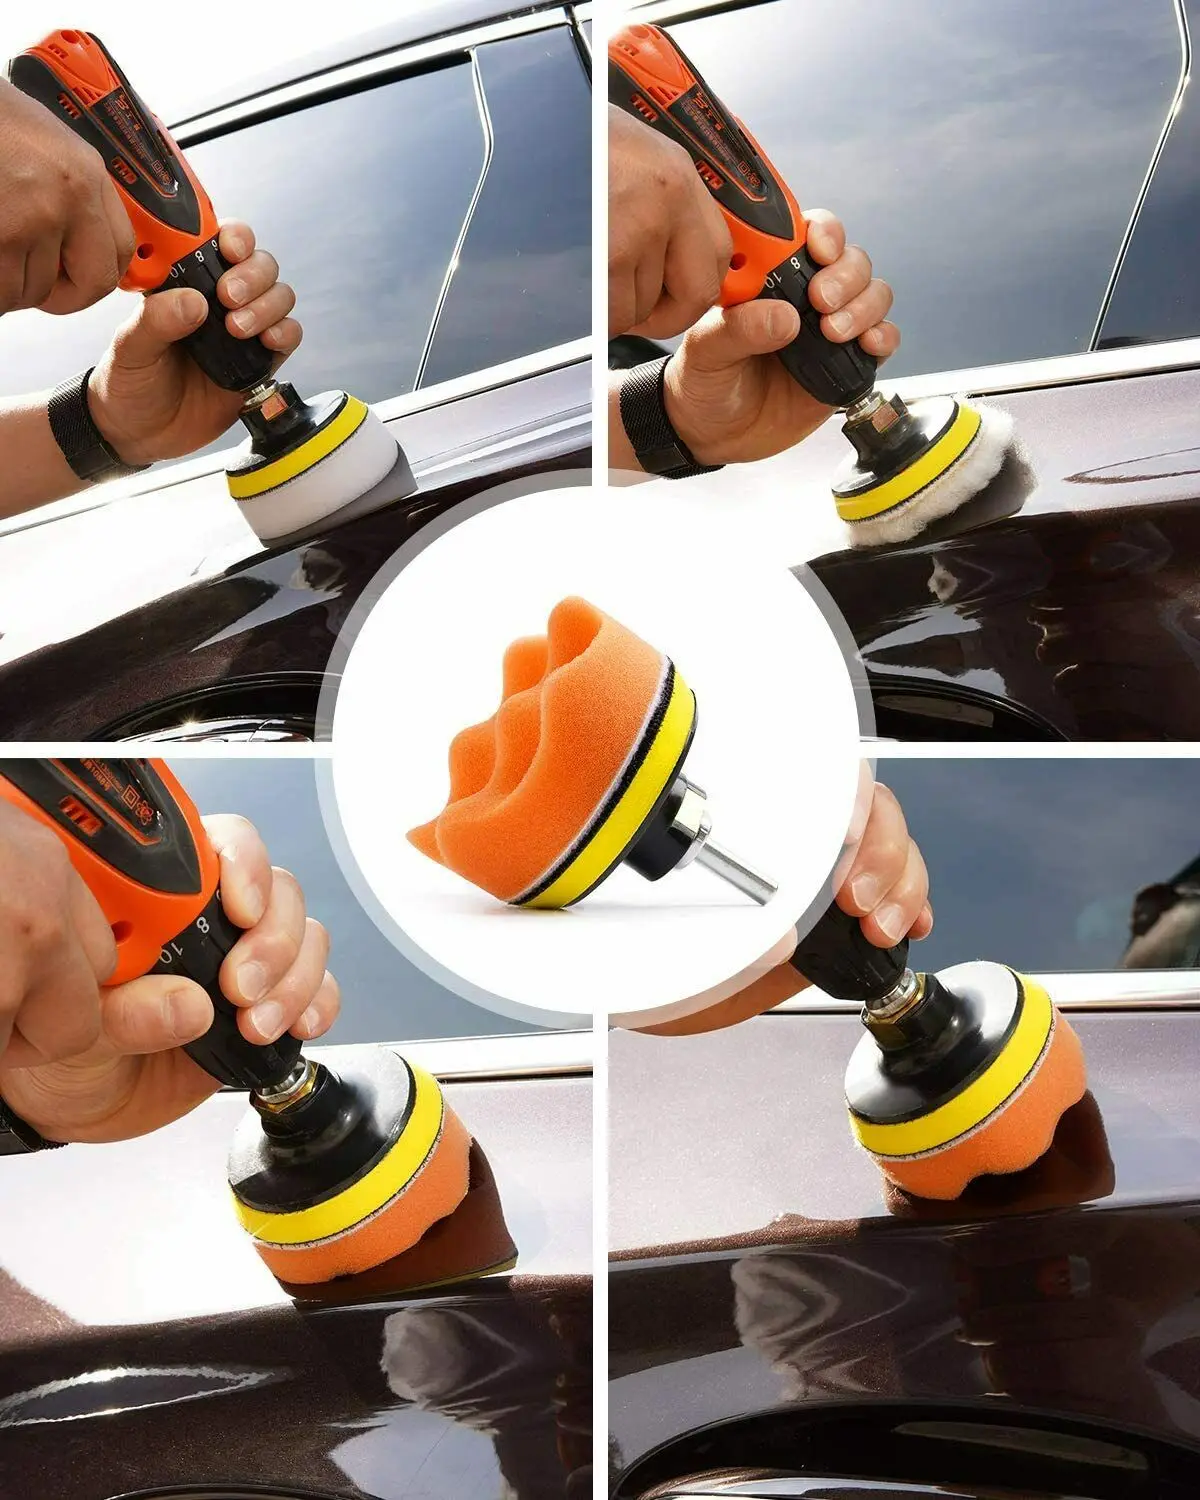 Buffing Pad Kit 1Set Gross Polish Polishing with Drill Adapter for